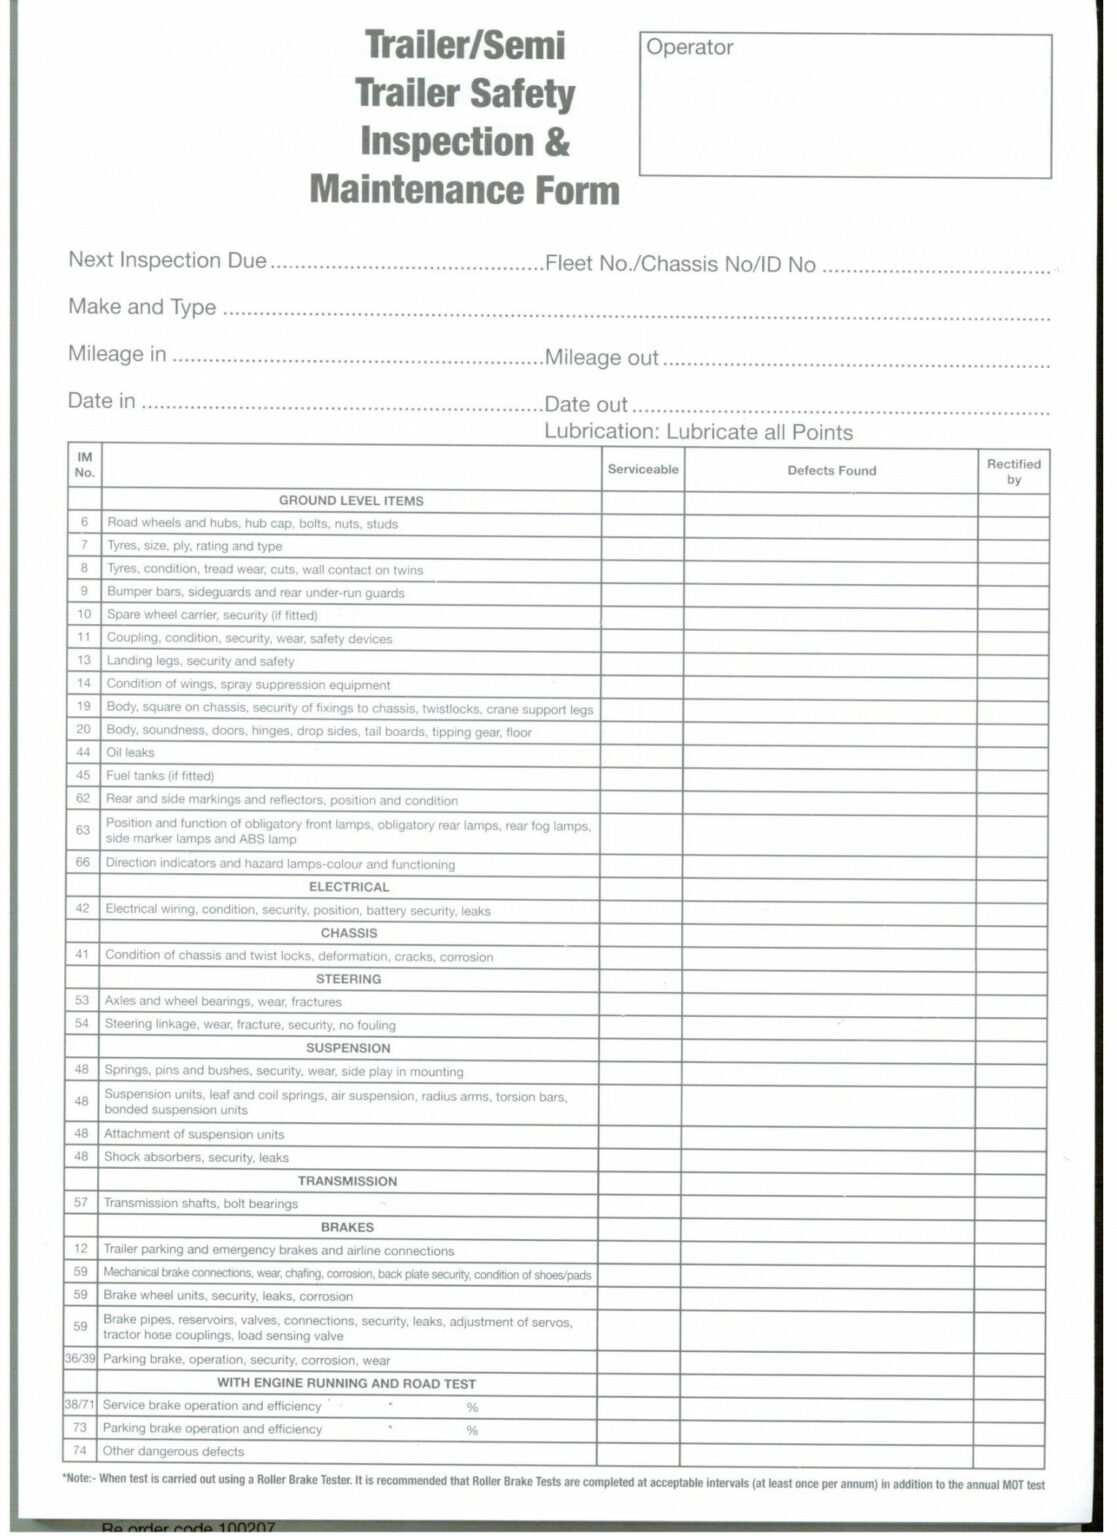 safe travel trailer towing checklist and calculator